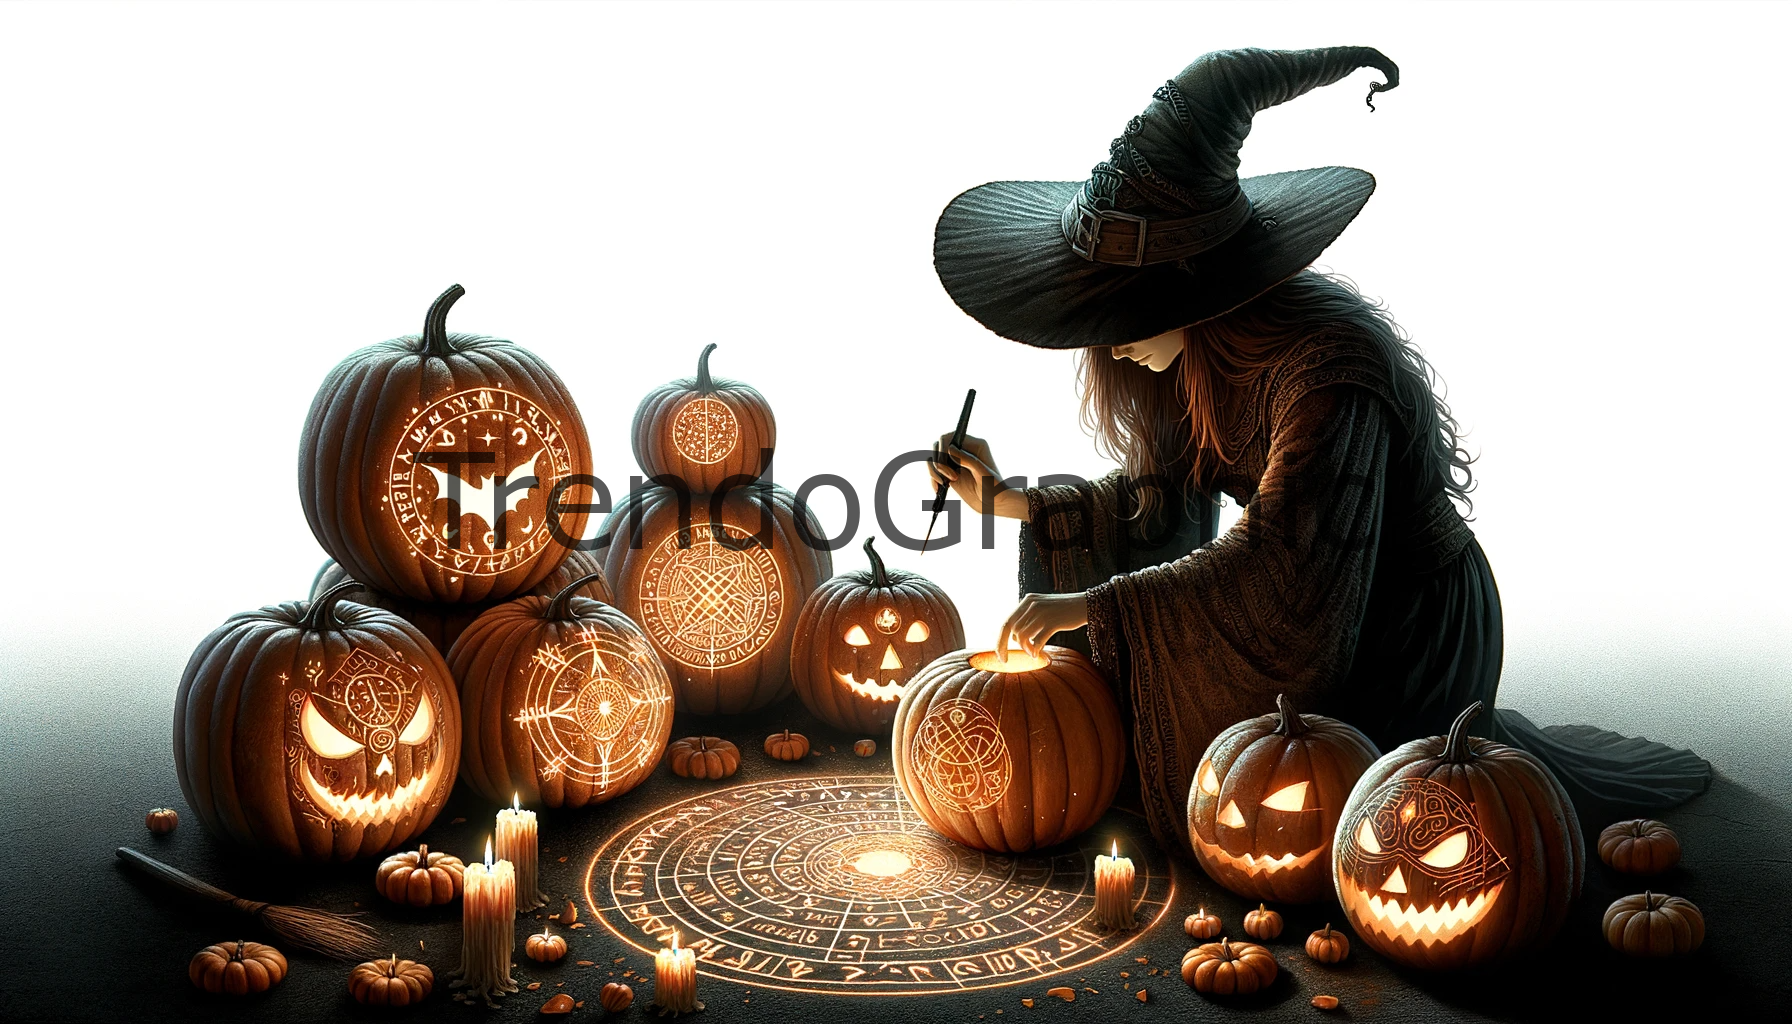 Mystical Halloween Night: Witch Carving Runes into Pumpkins